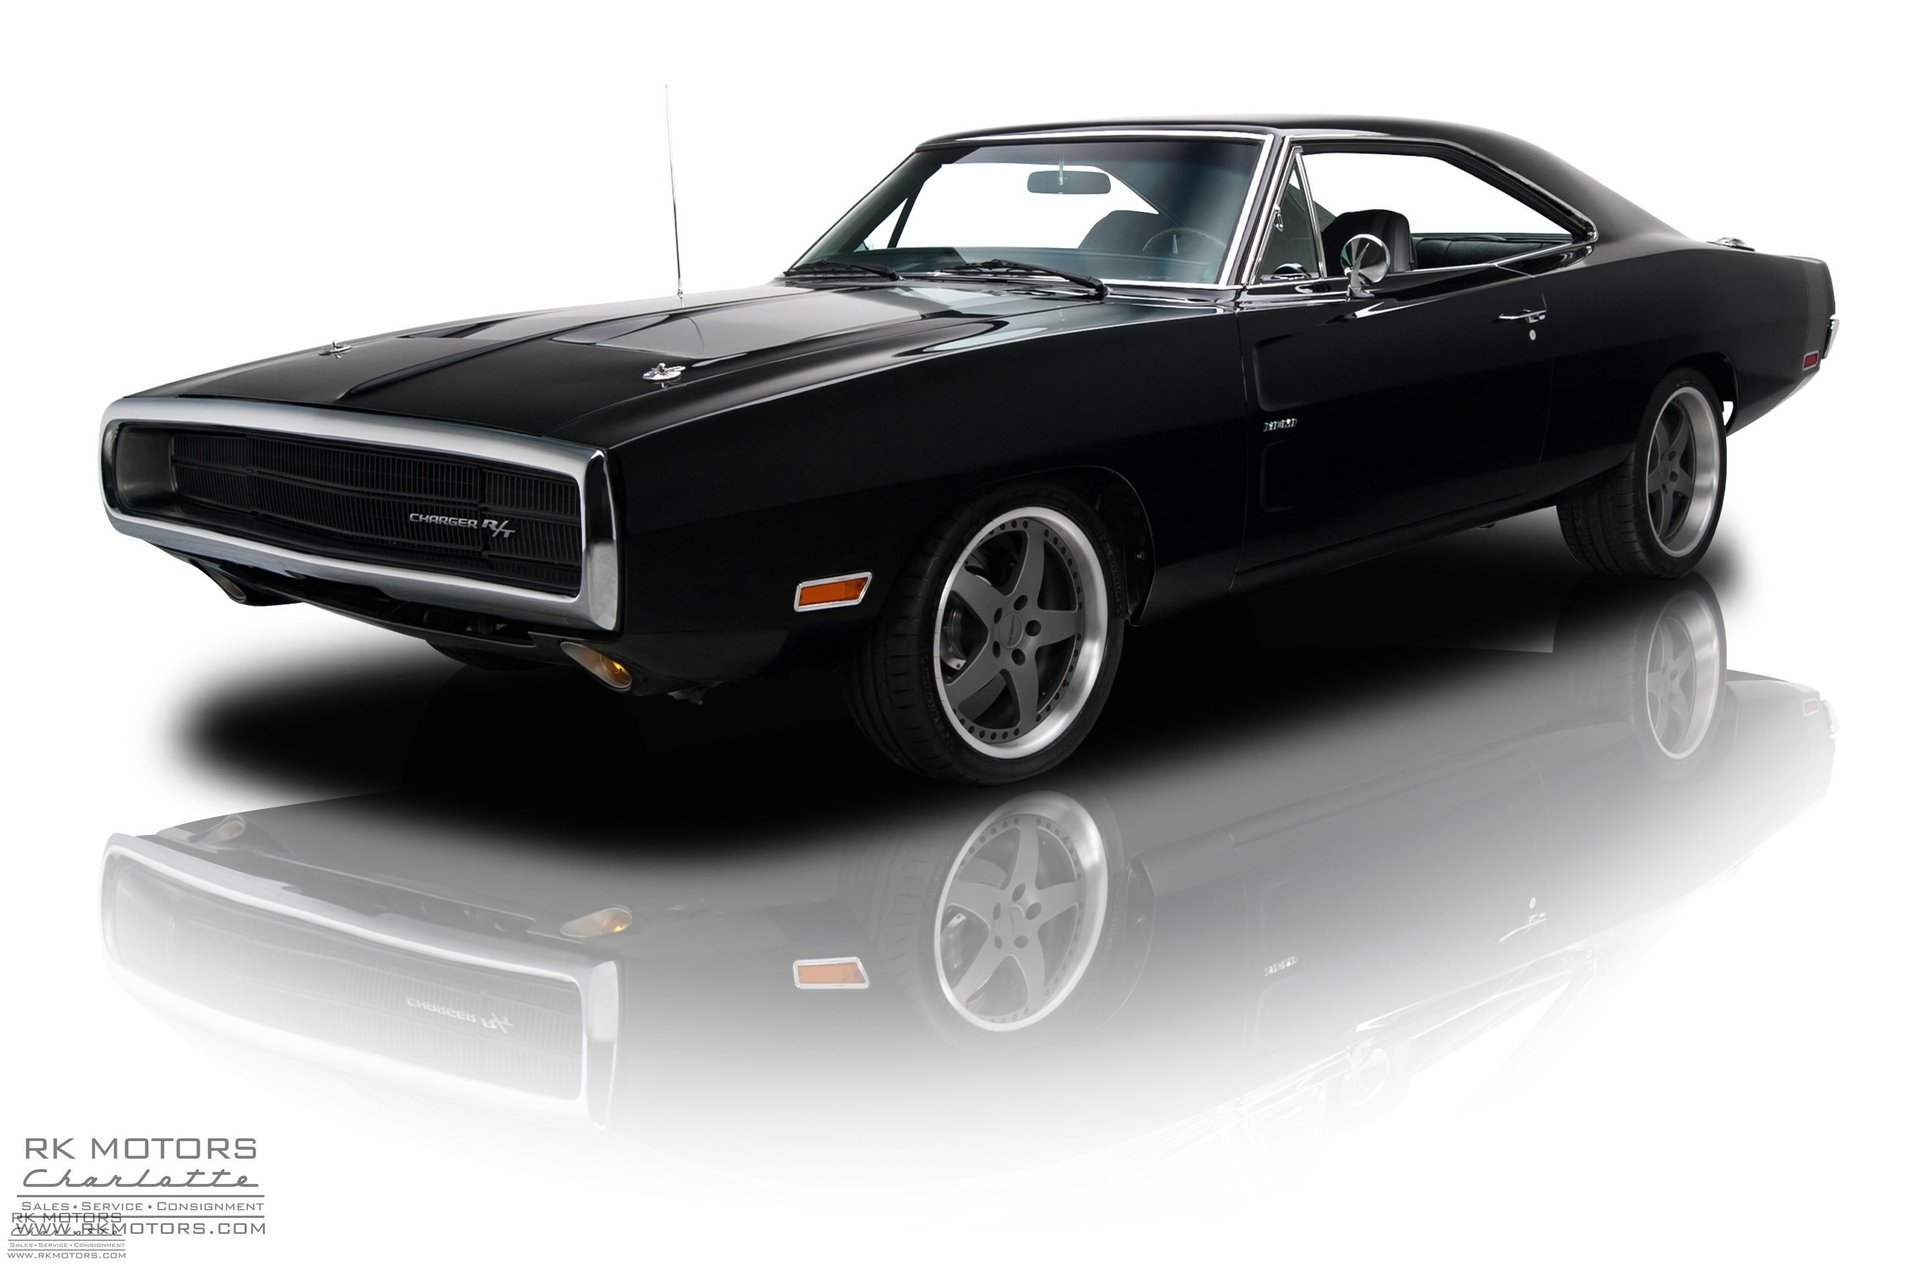 131004 1970 Dodge Charger RK Motors Classic Cars and Muscle Cars